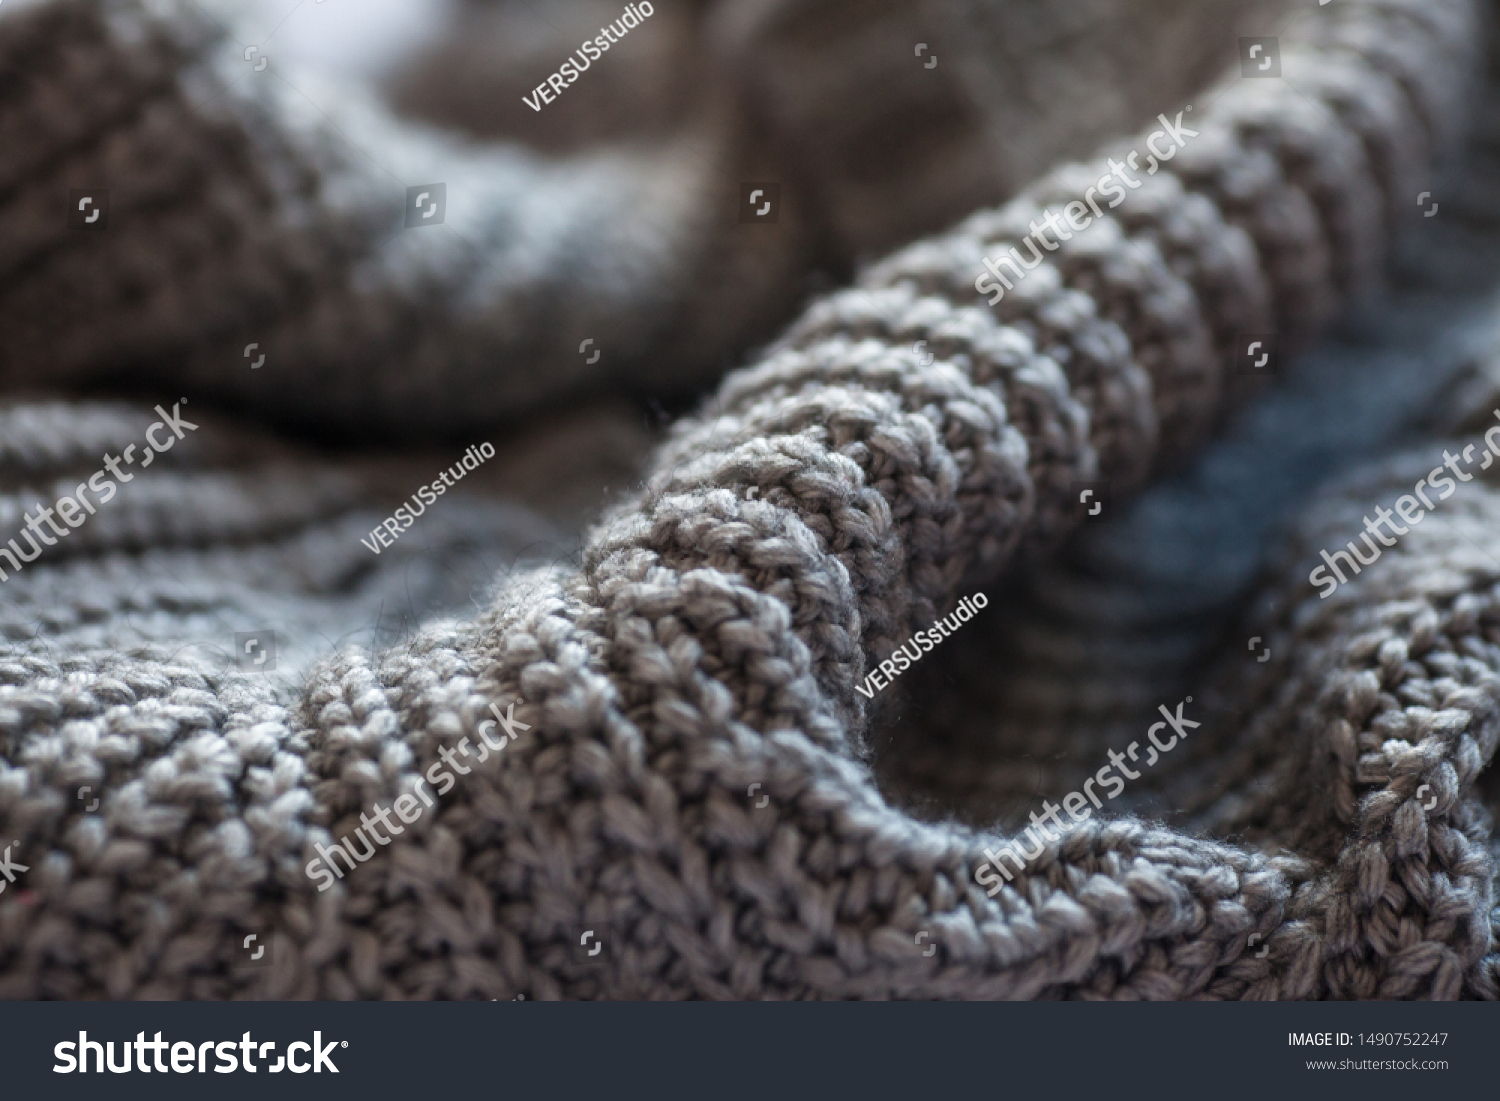 Wool fabric texture close up background. Cozy style cloth. Wavy folds material #1490752247